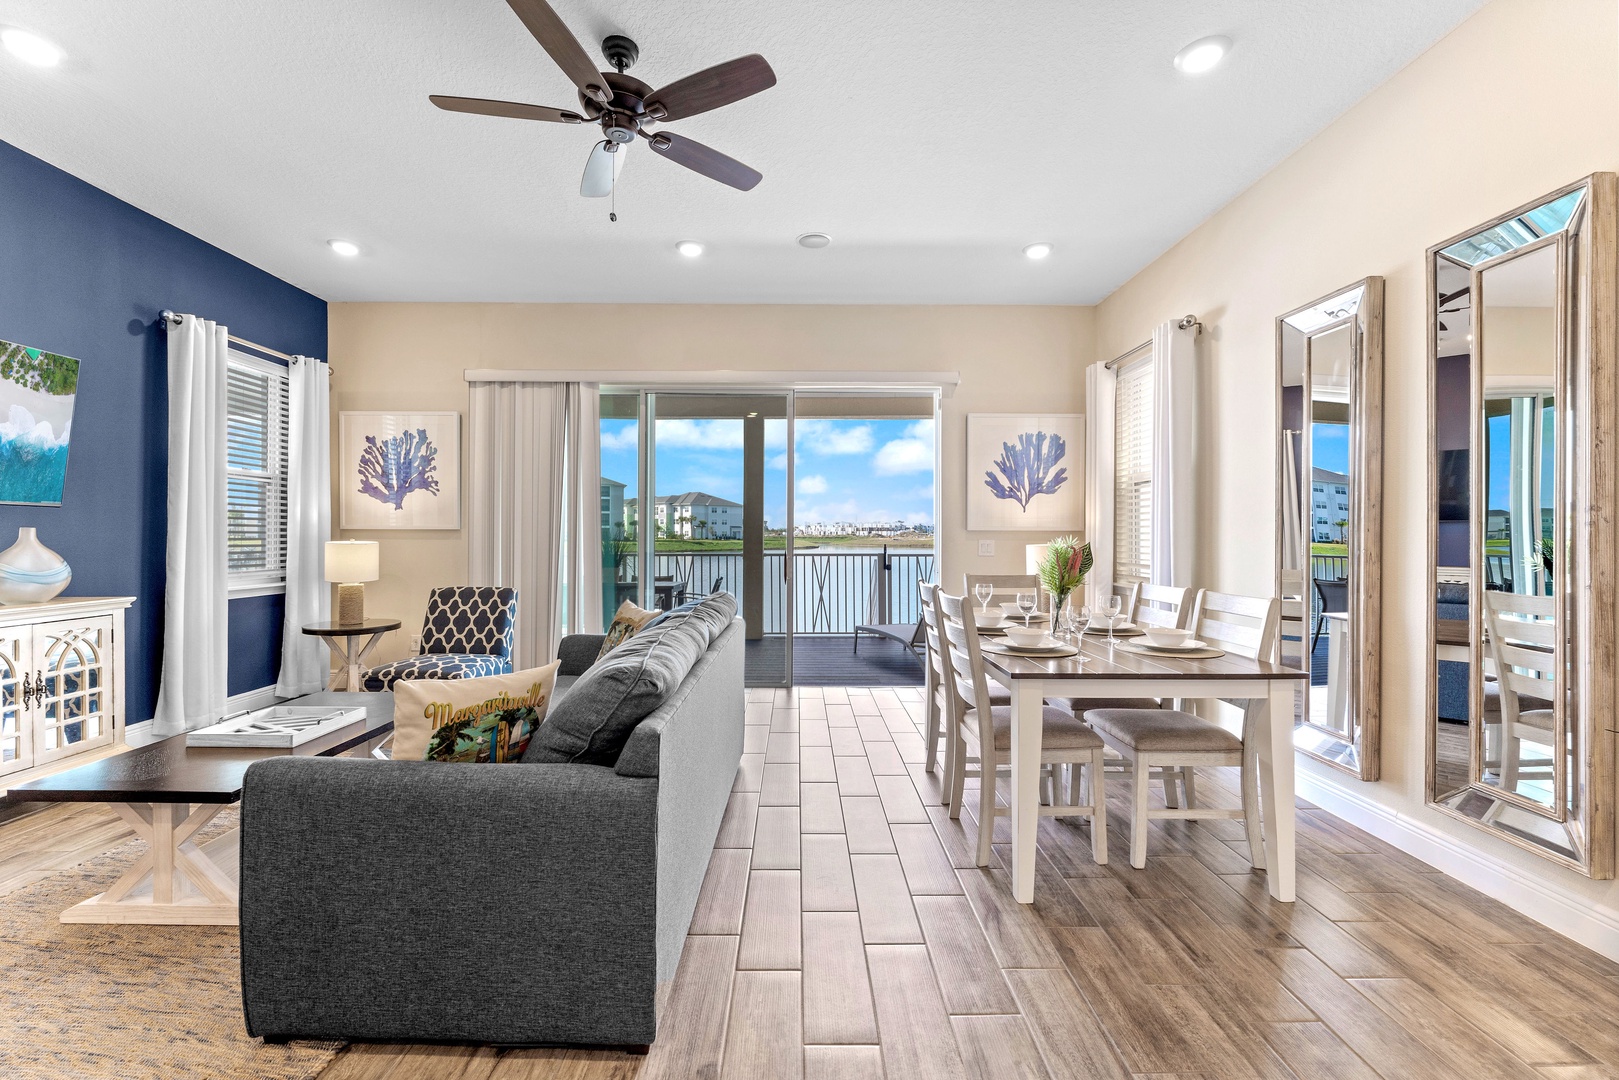 Step into the bright and open living space, adorned with coastal charm